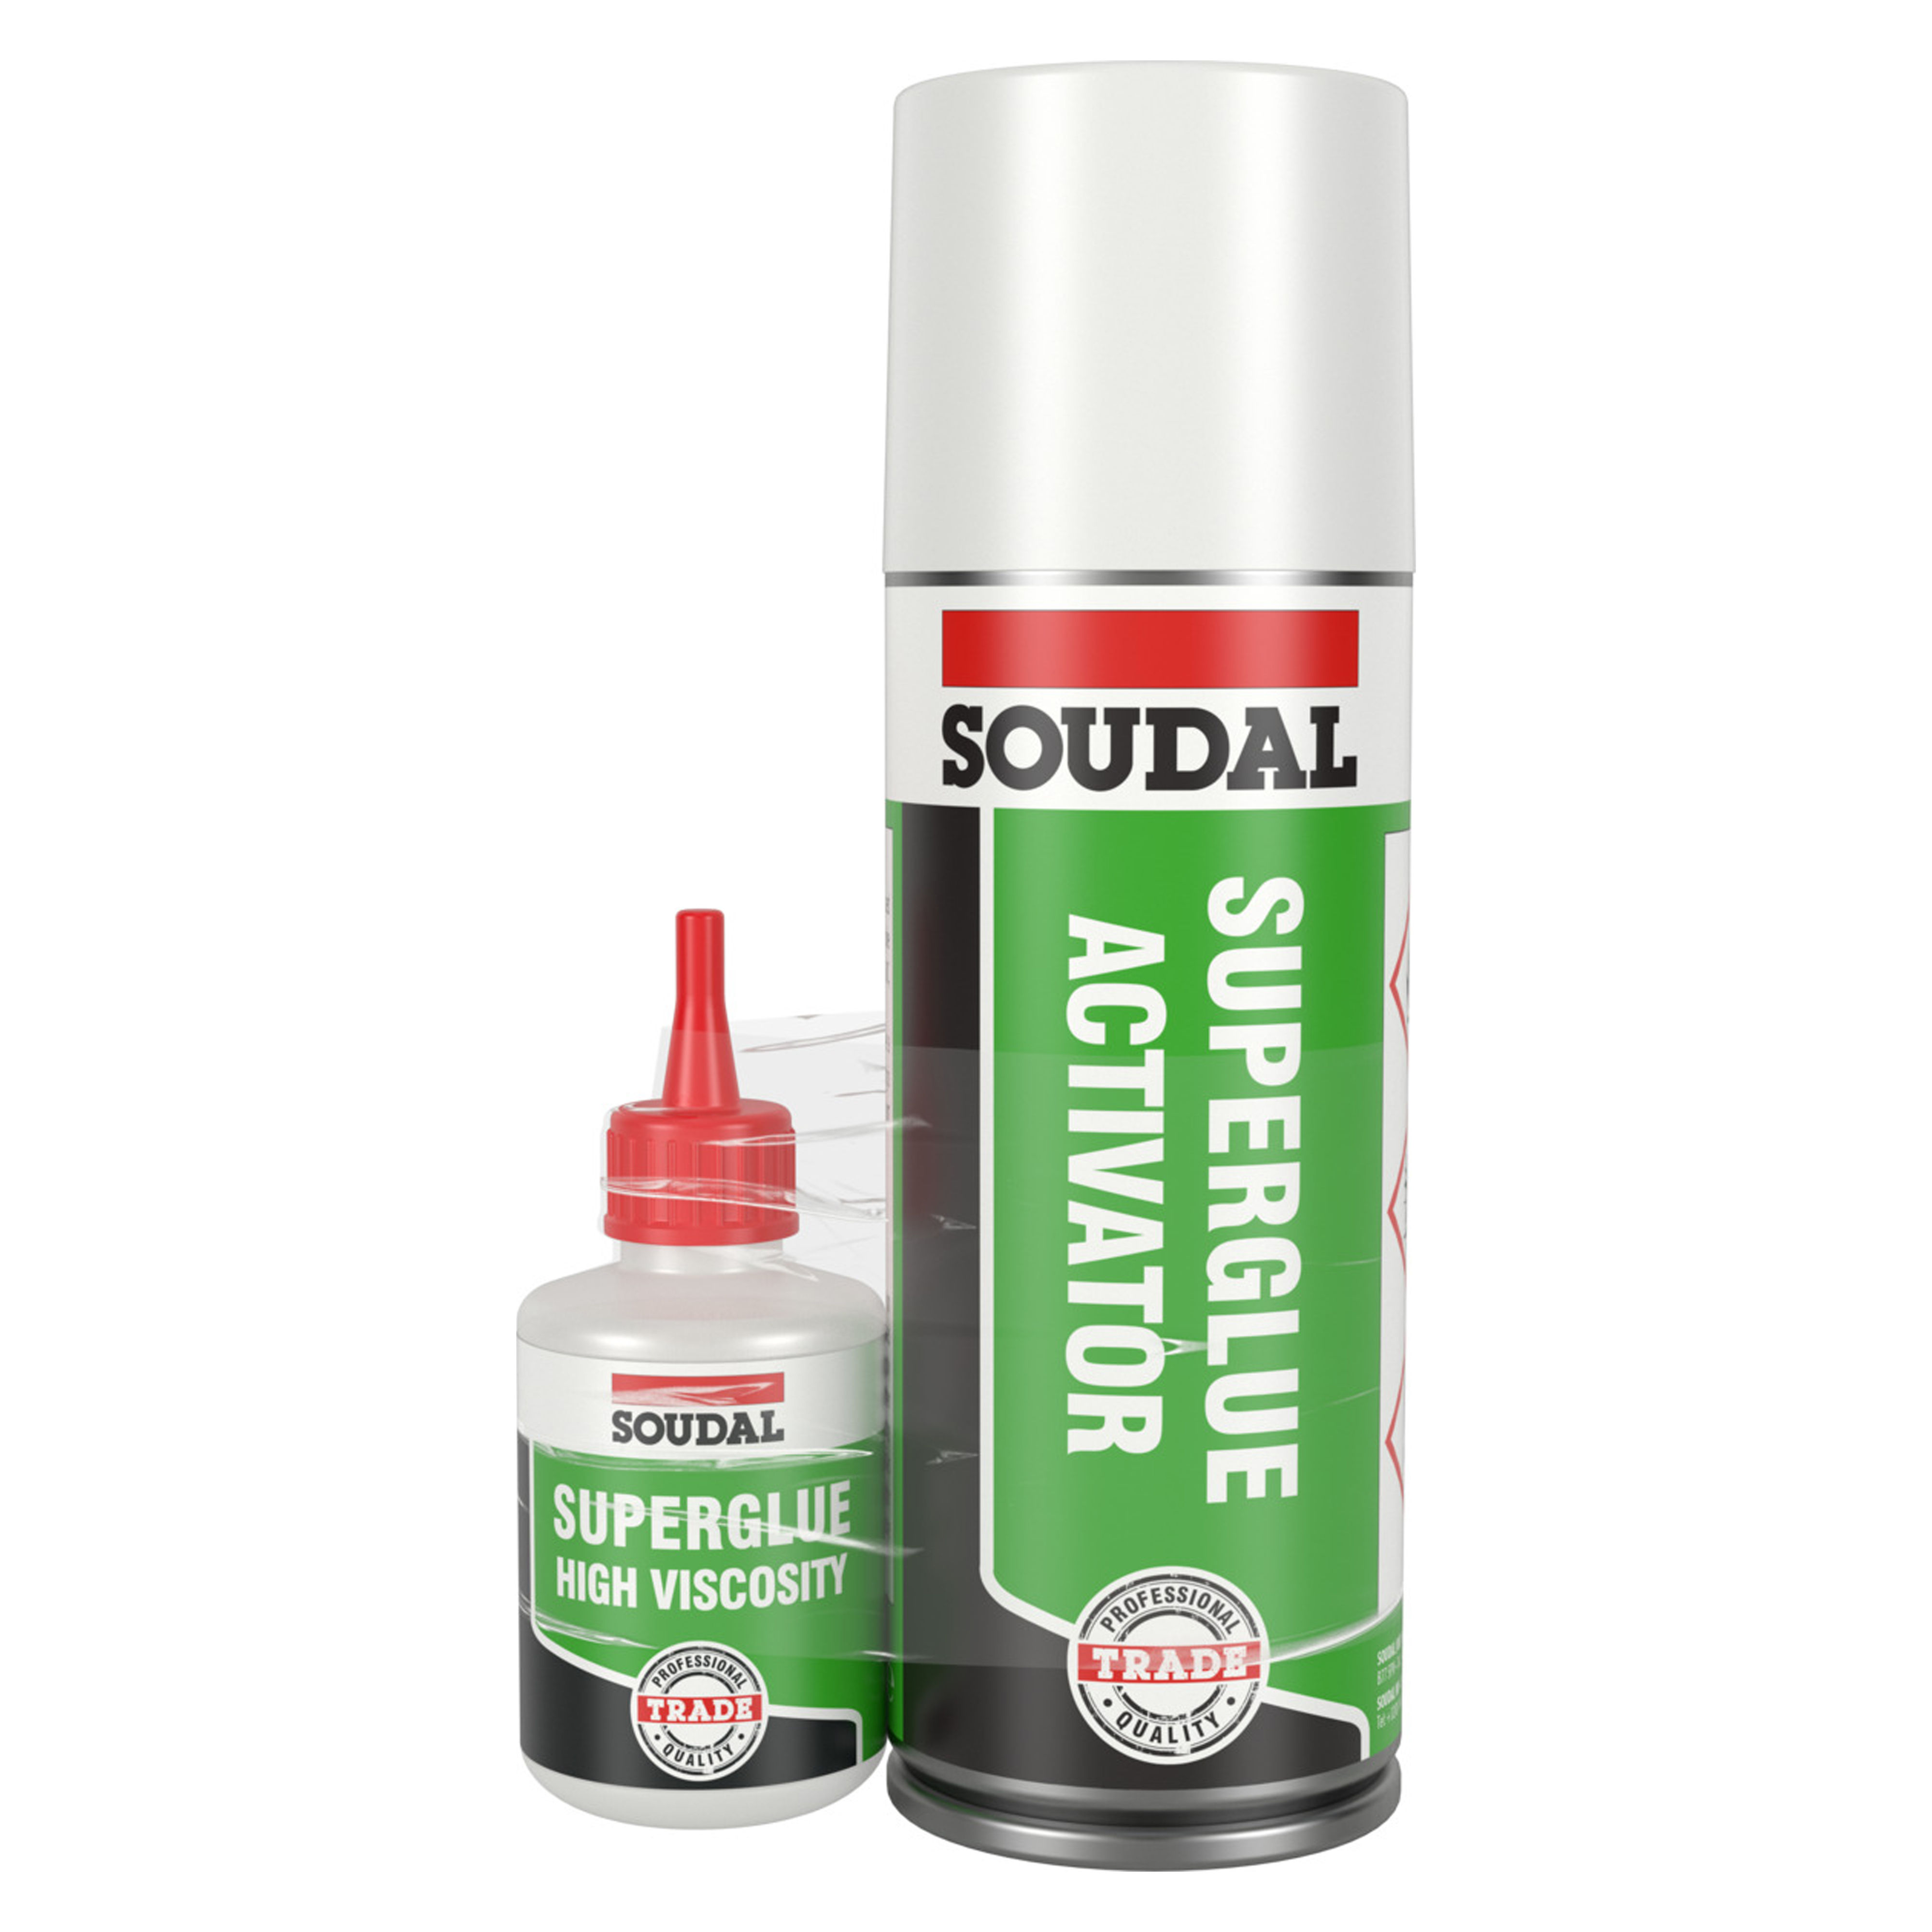 Soudal Trade Mitre Kit 50g Bottle and 200ml Spray